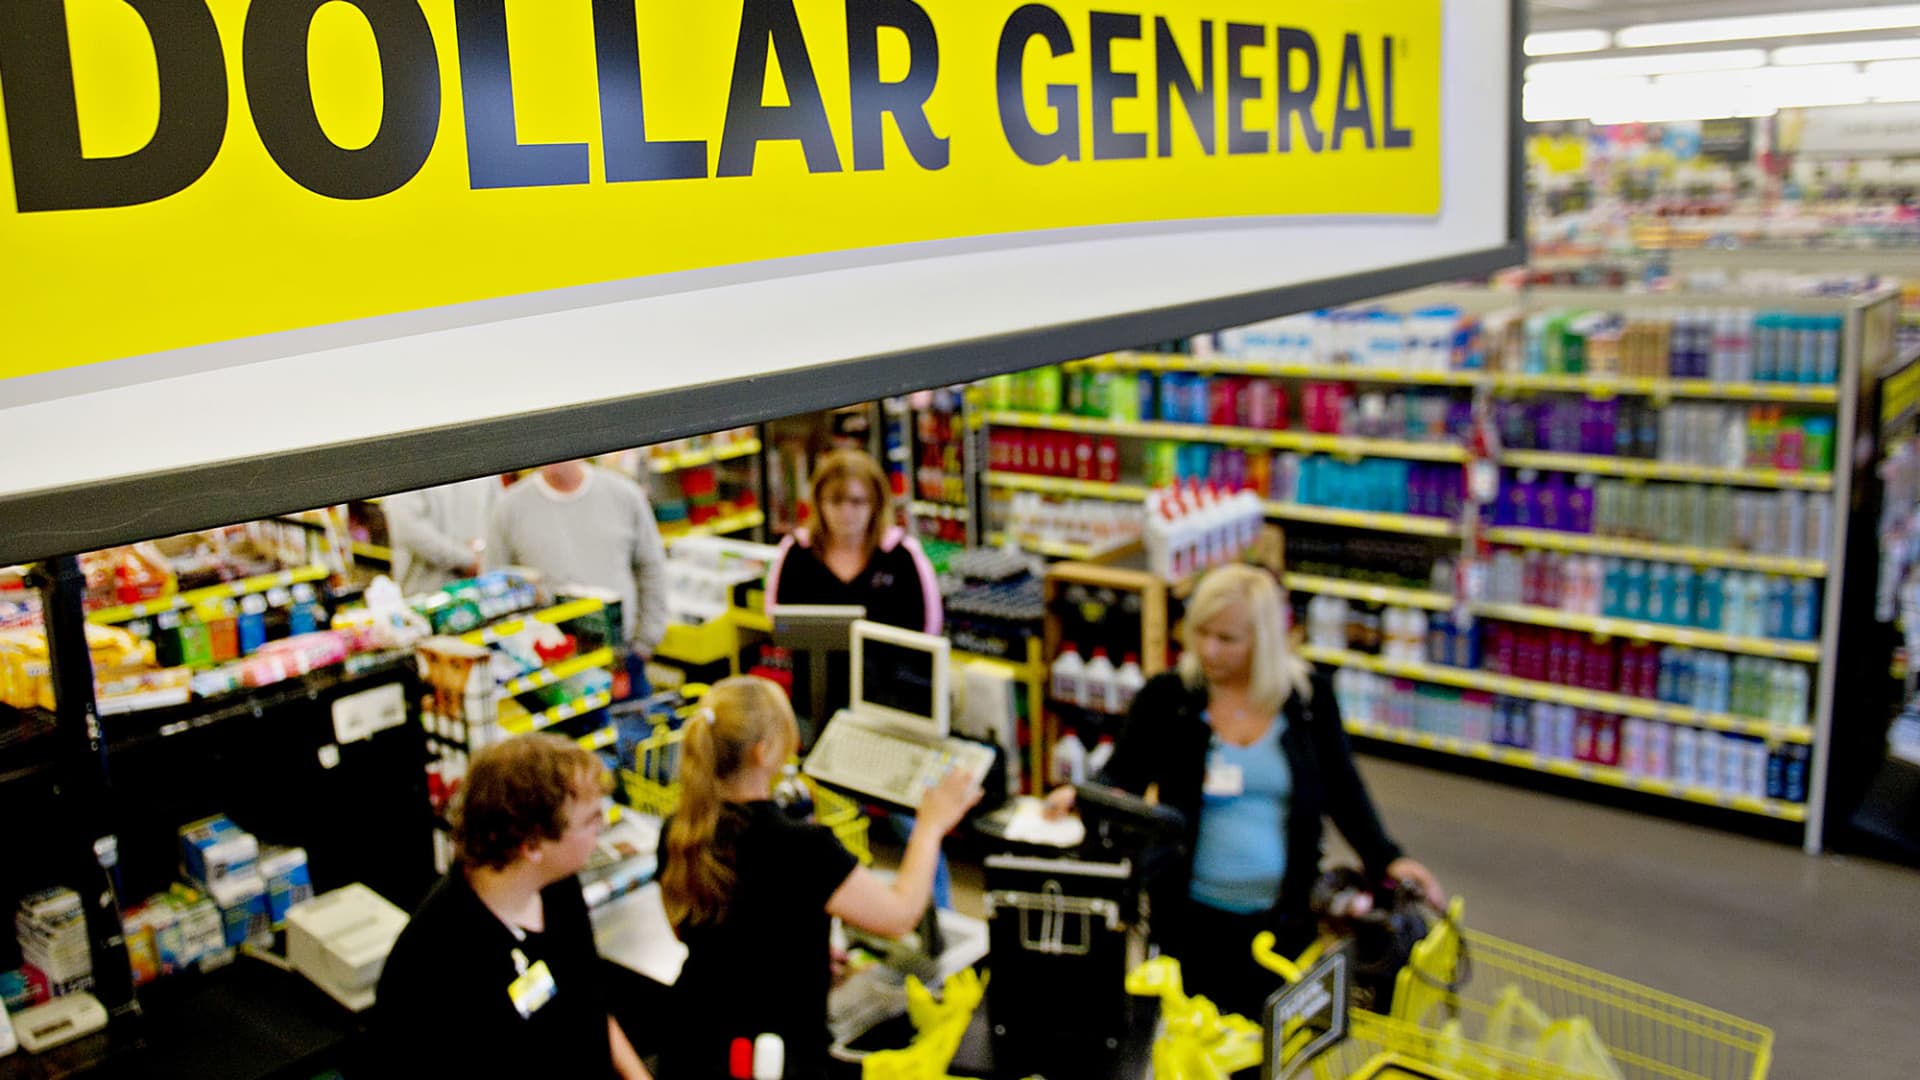 Dollar General hit by more worker safety fines at Florida, Alabama stores